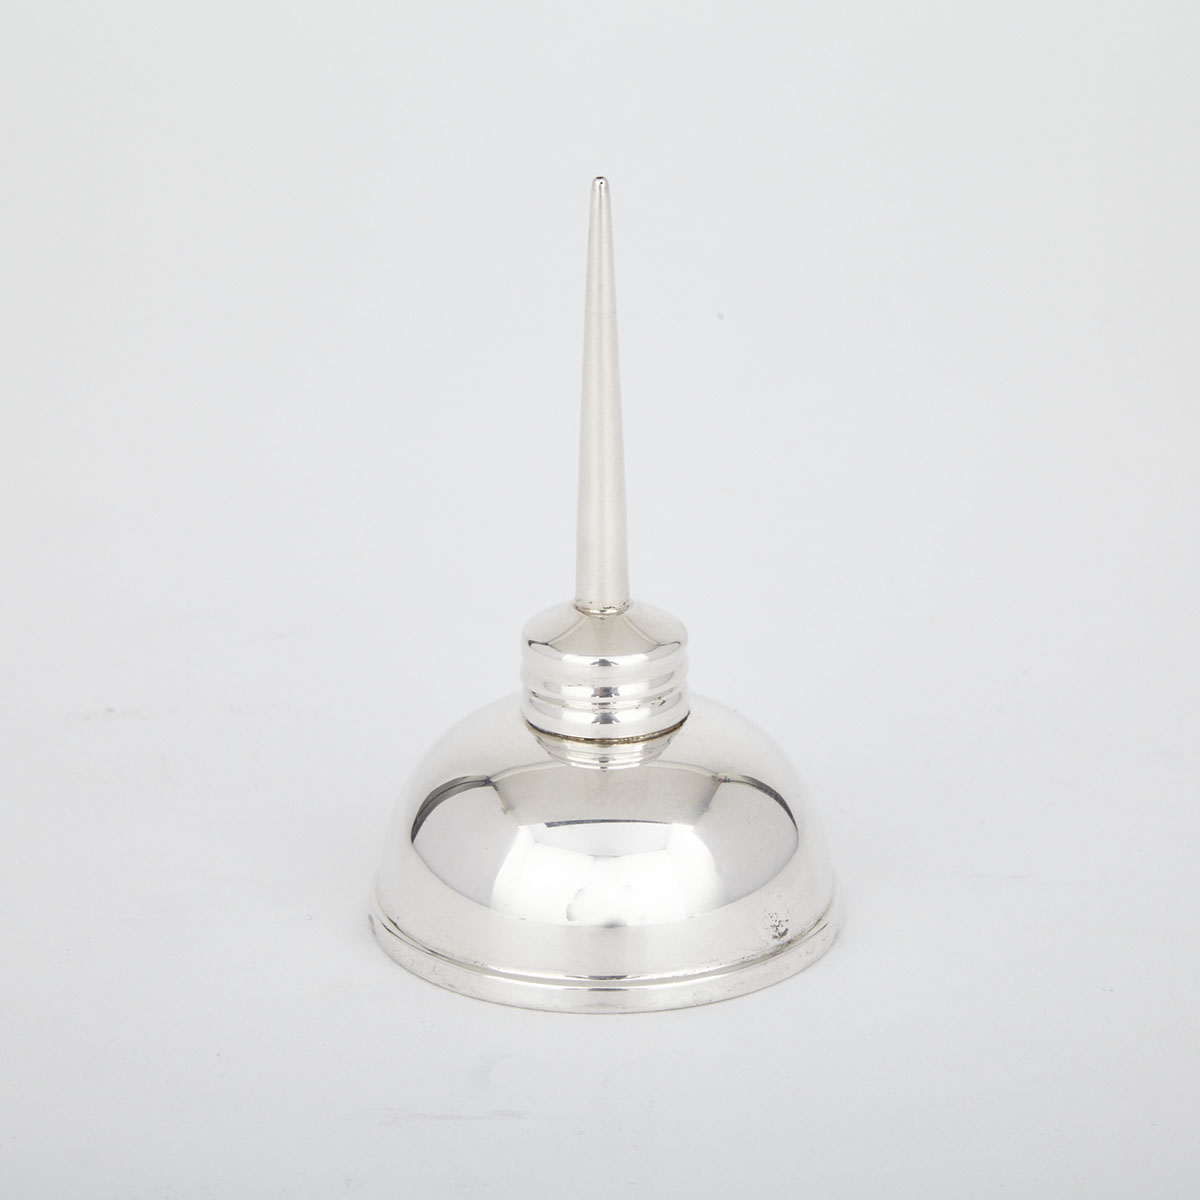 Canadian Silver Vermouth Dropper, Henry Birks & Sons, Montreal, Que., 20th century